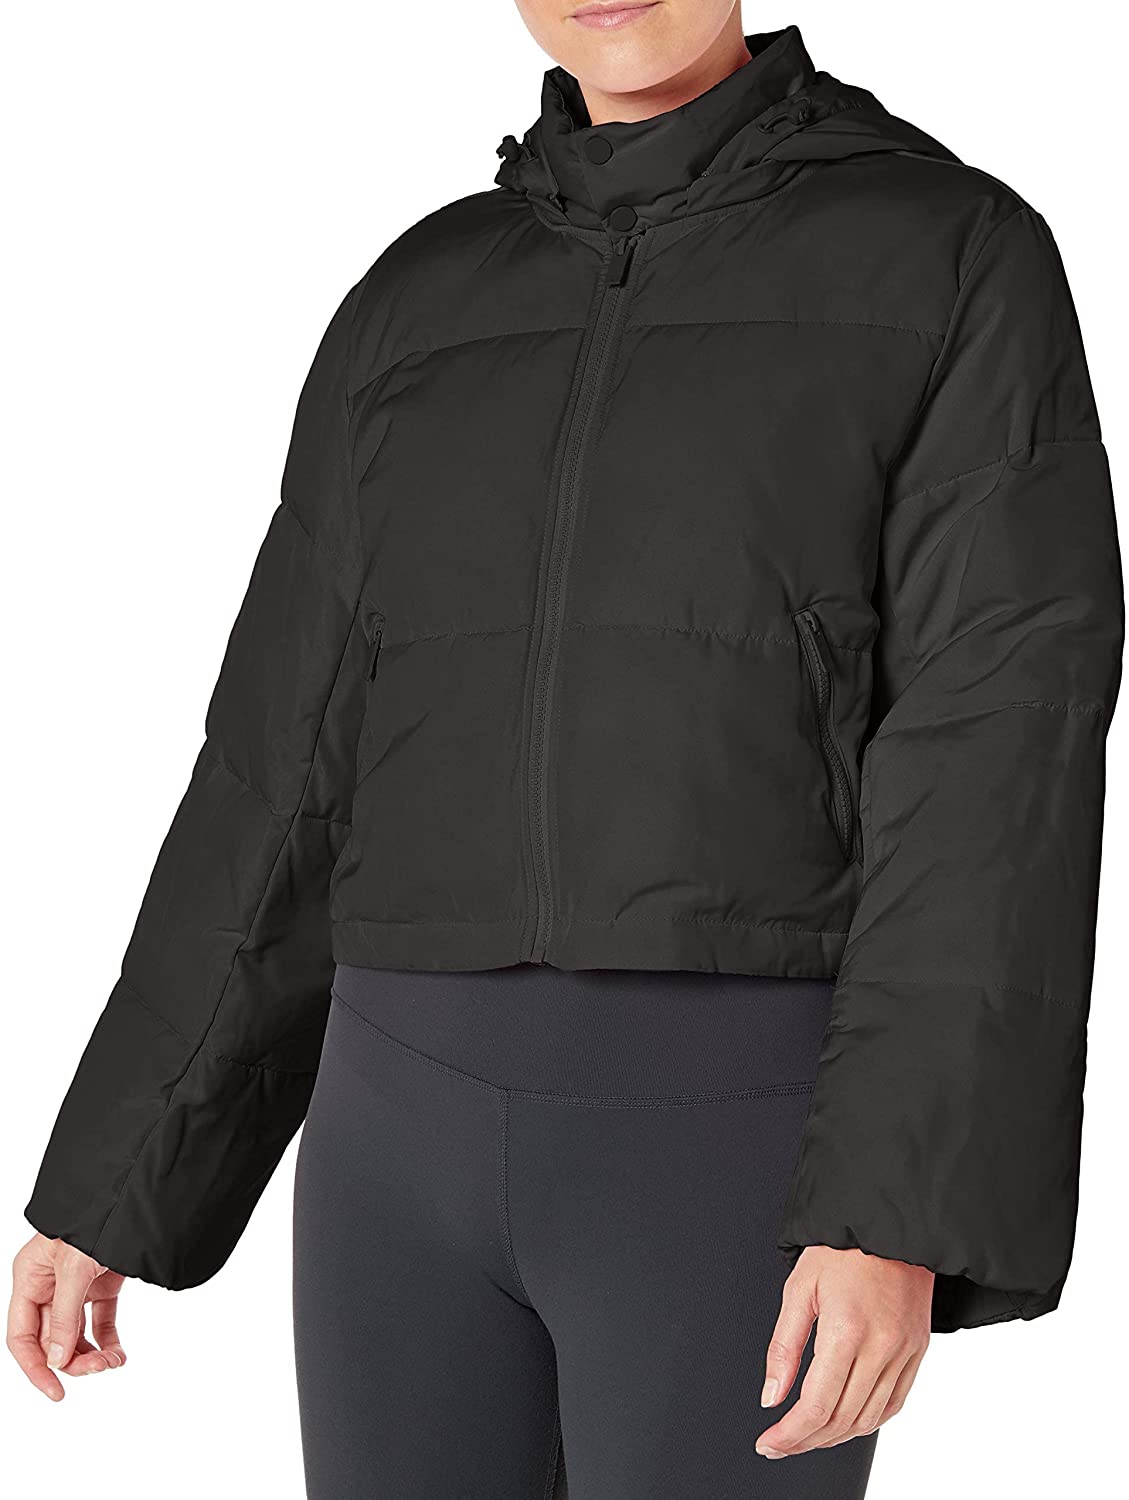 All Sport ALO Ladies' Jacket w/ runners thumb Yoga Fitness S-2XL womans W4009 